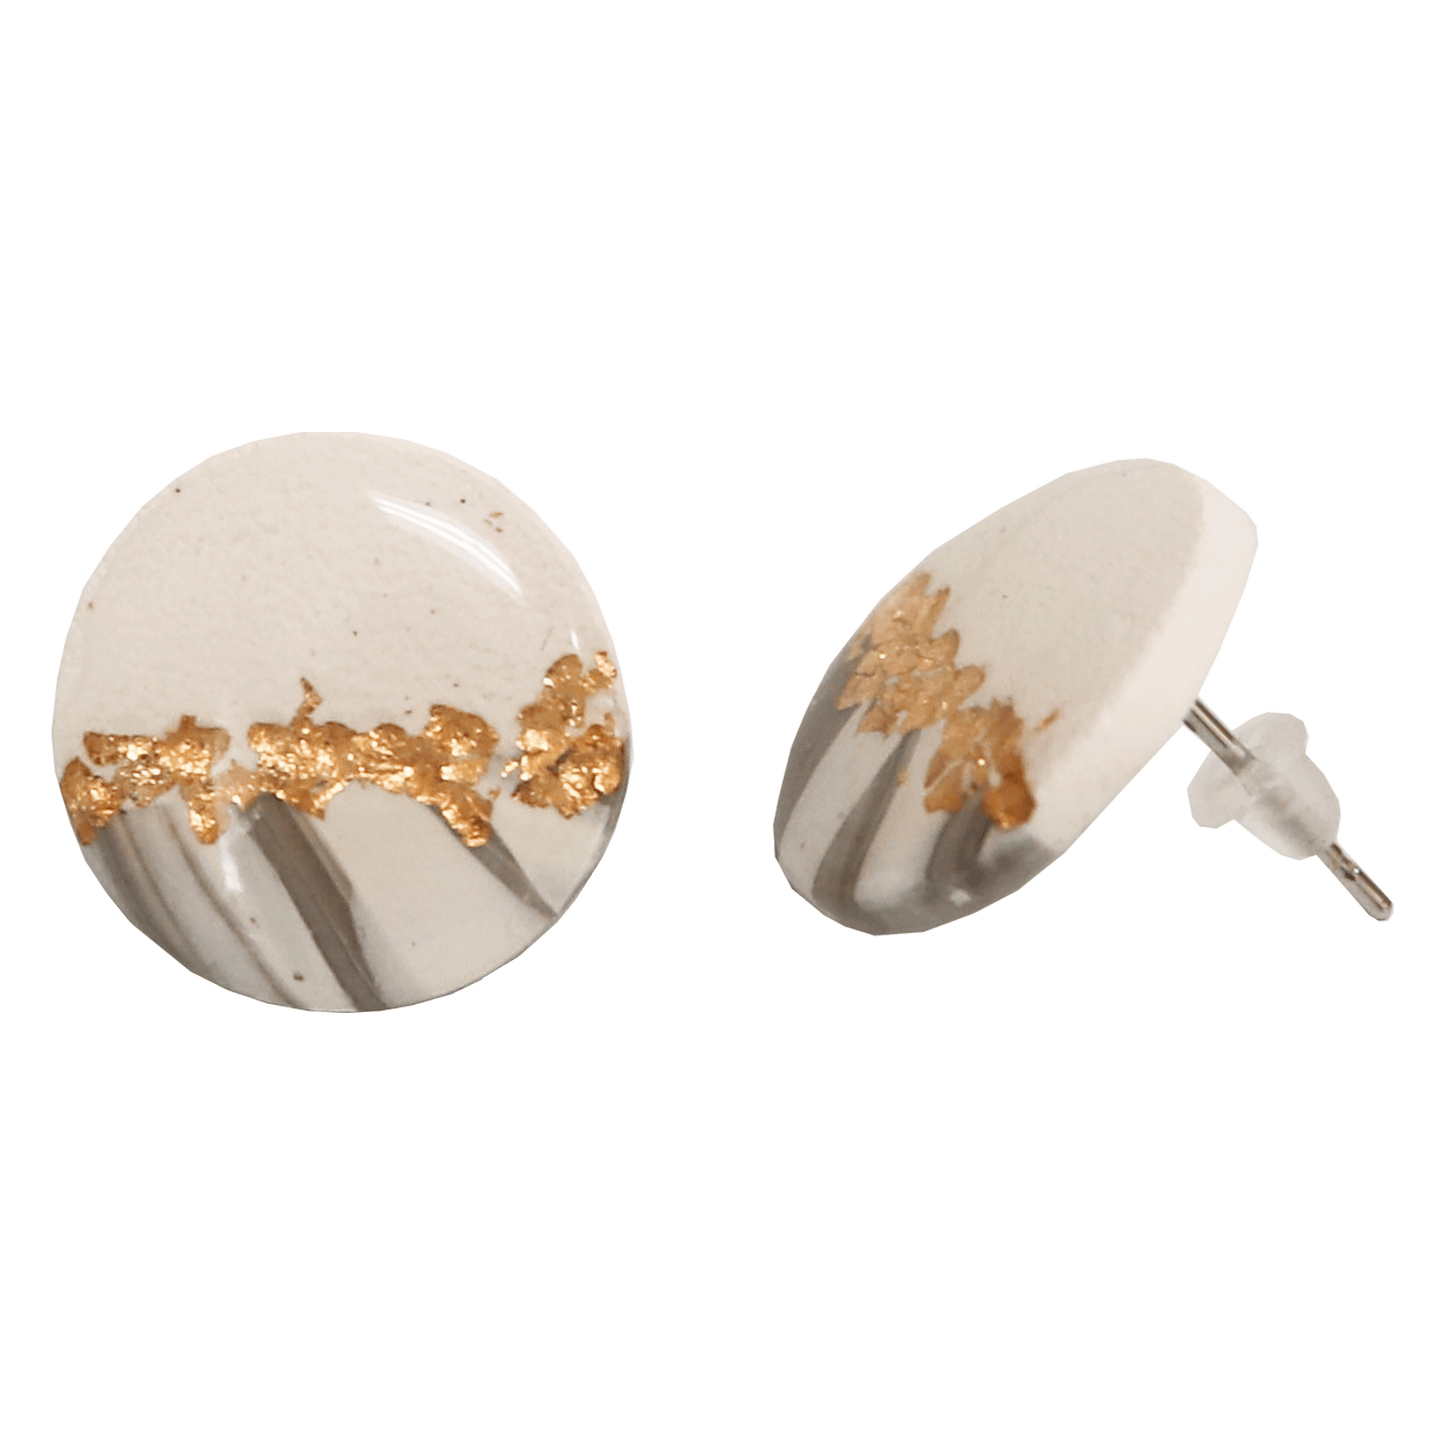 White and Gold Clay Stud Earrings